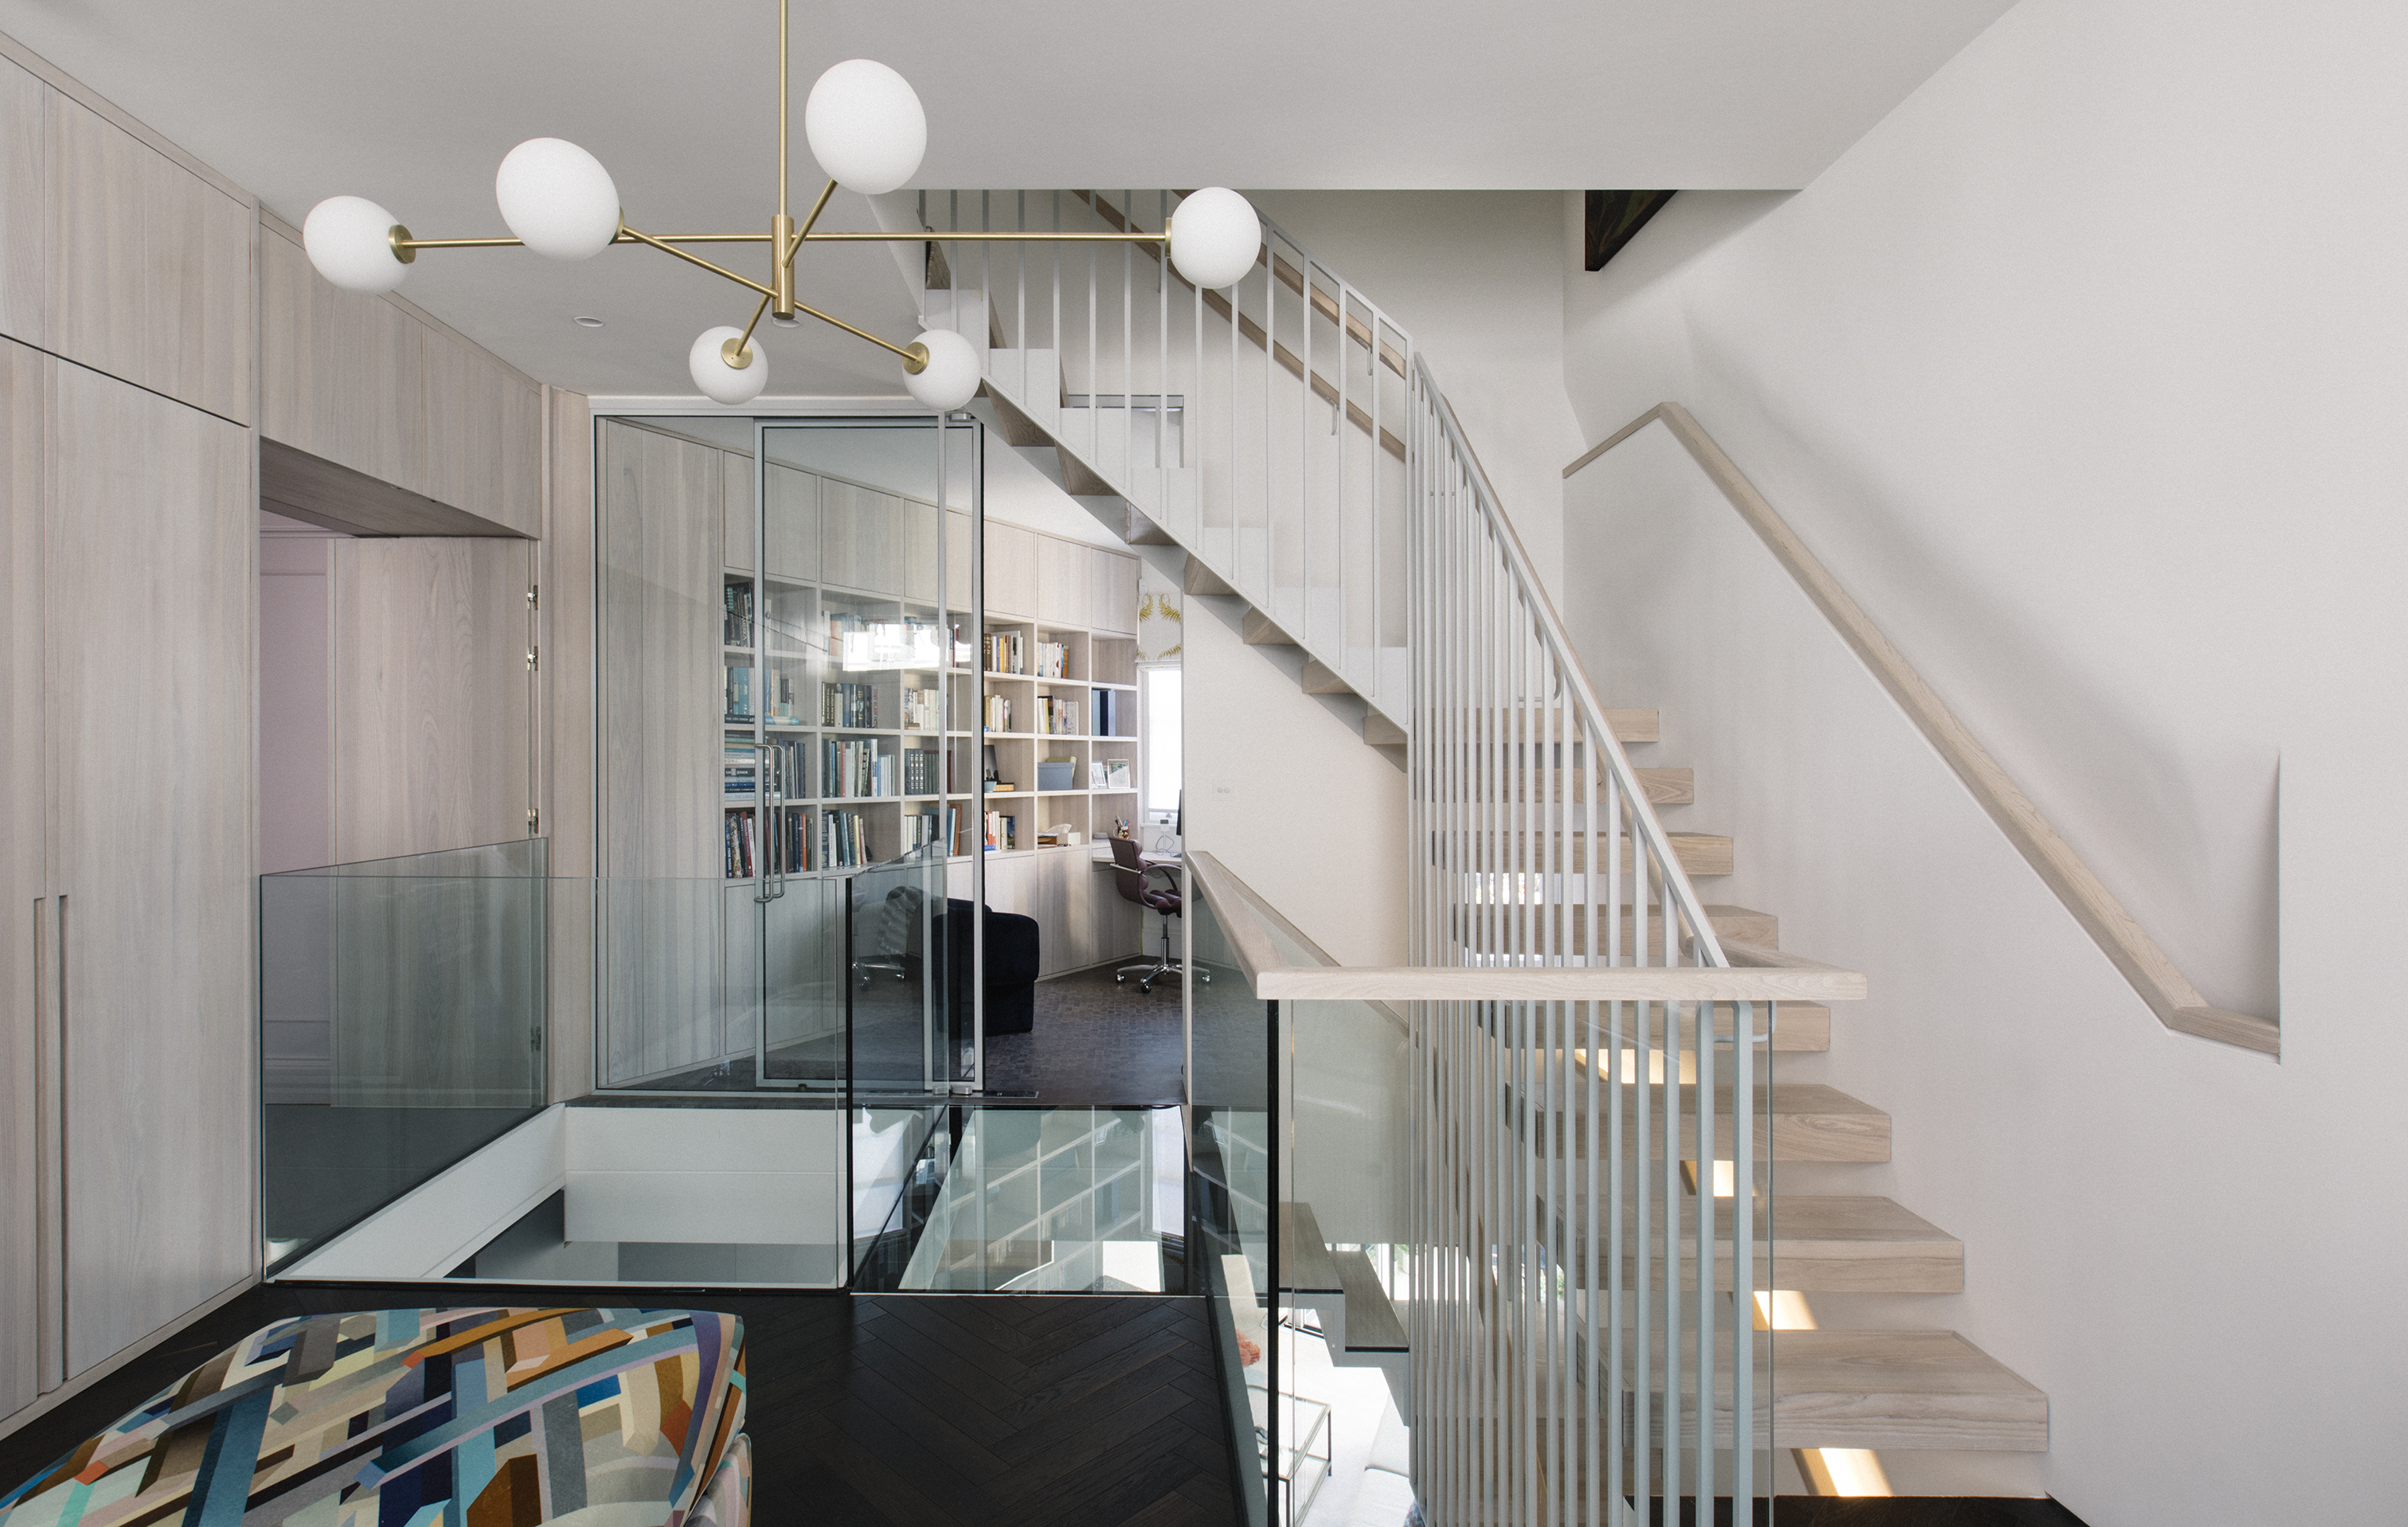 A modern chandelier and glass bridge greet visitors in the entrance hall